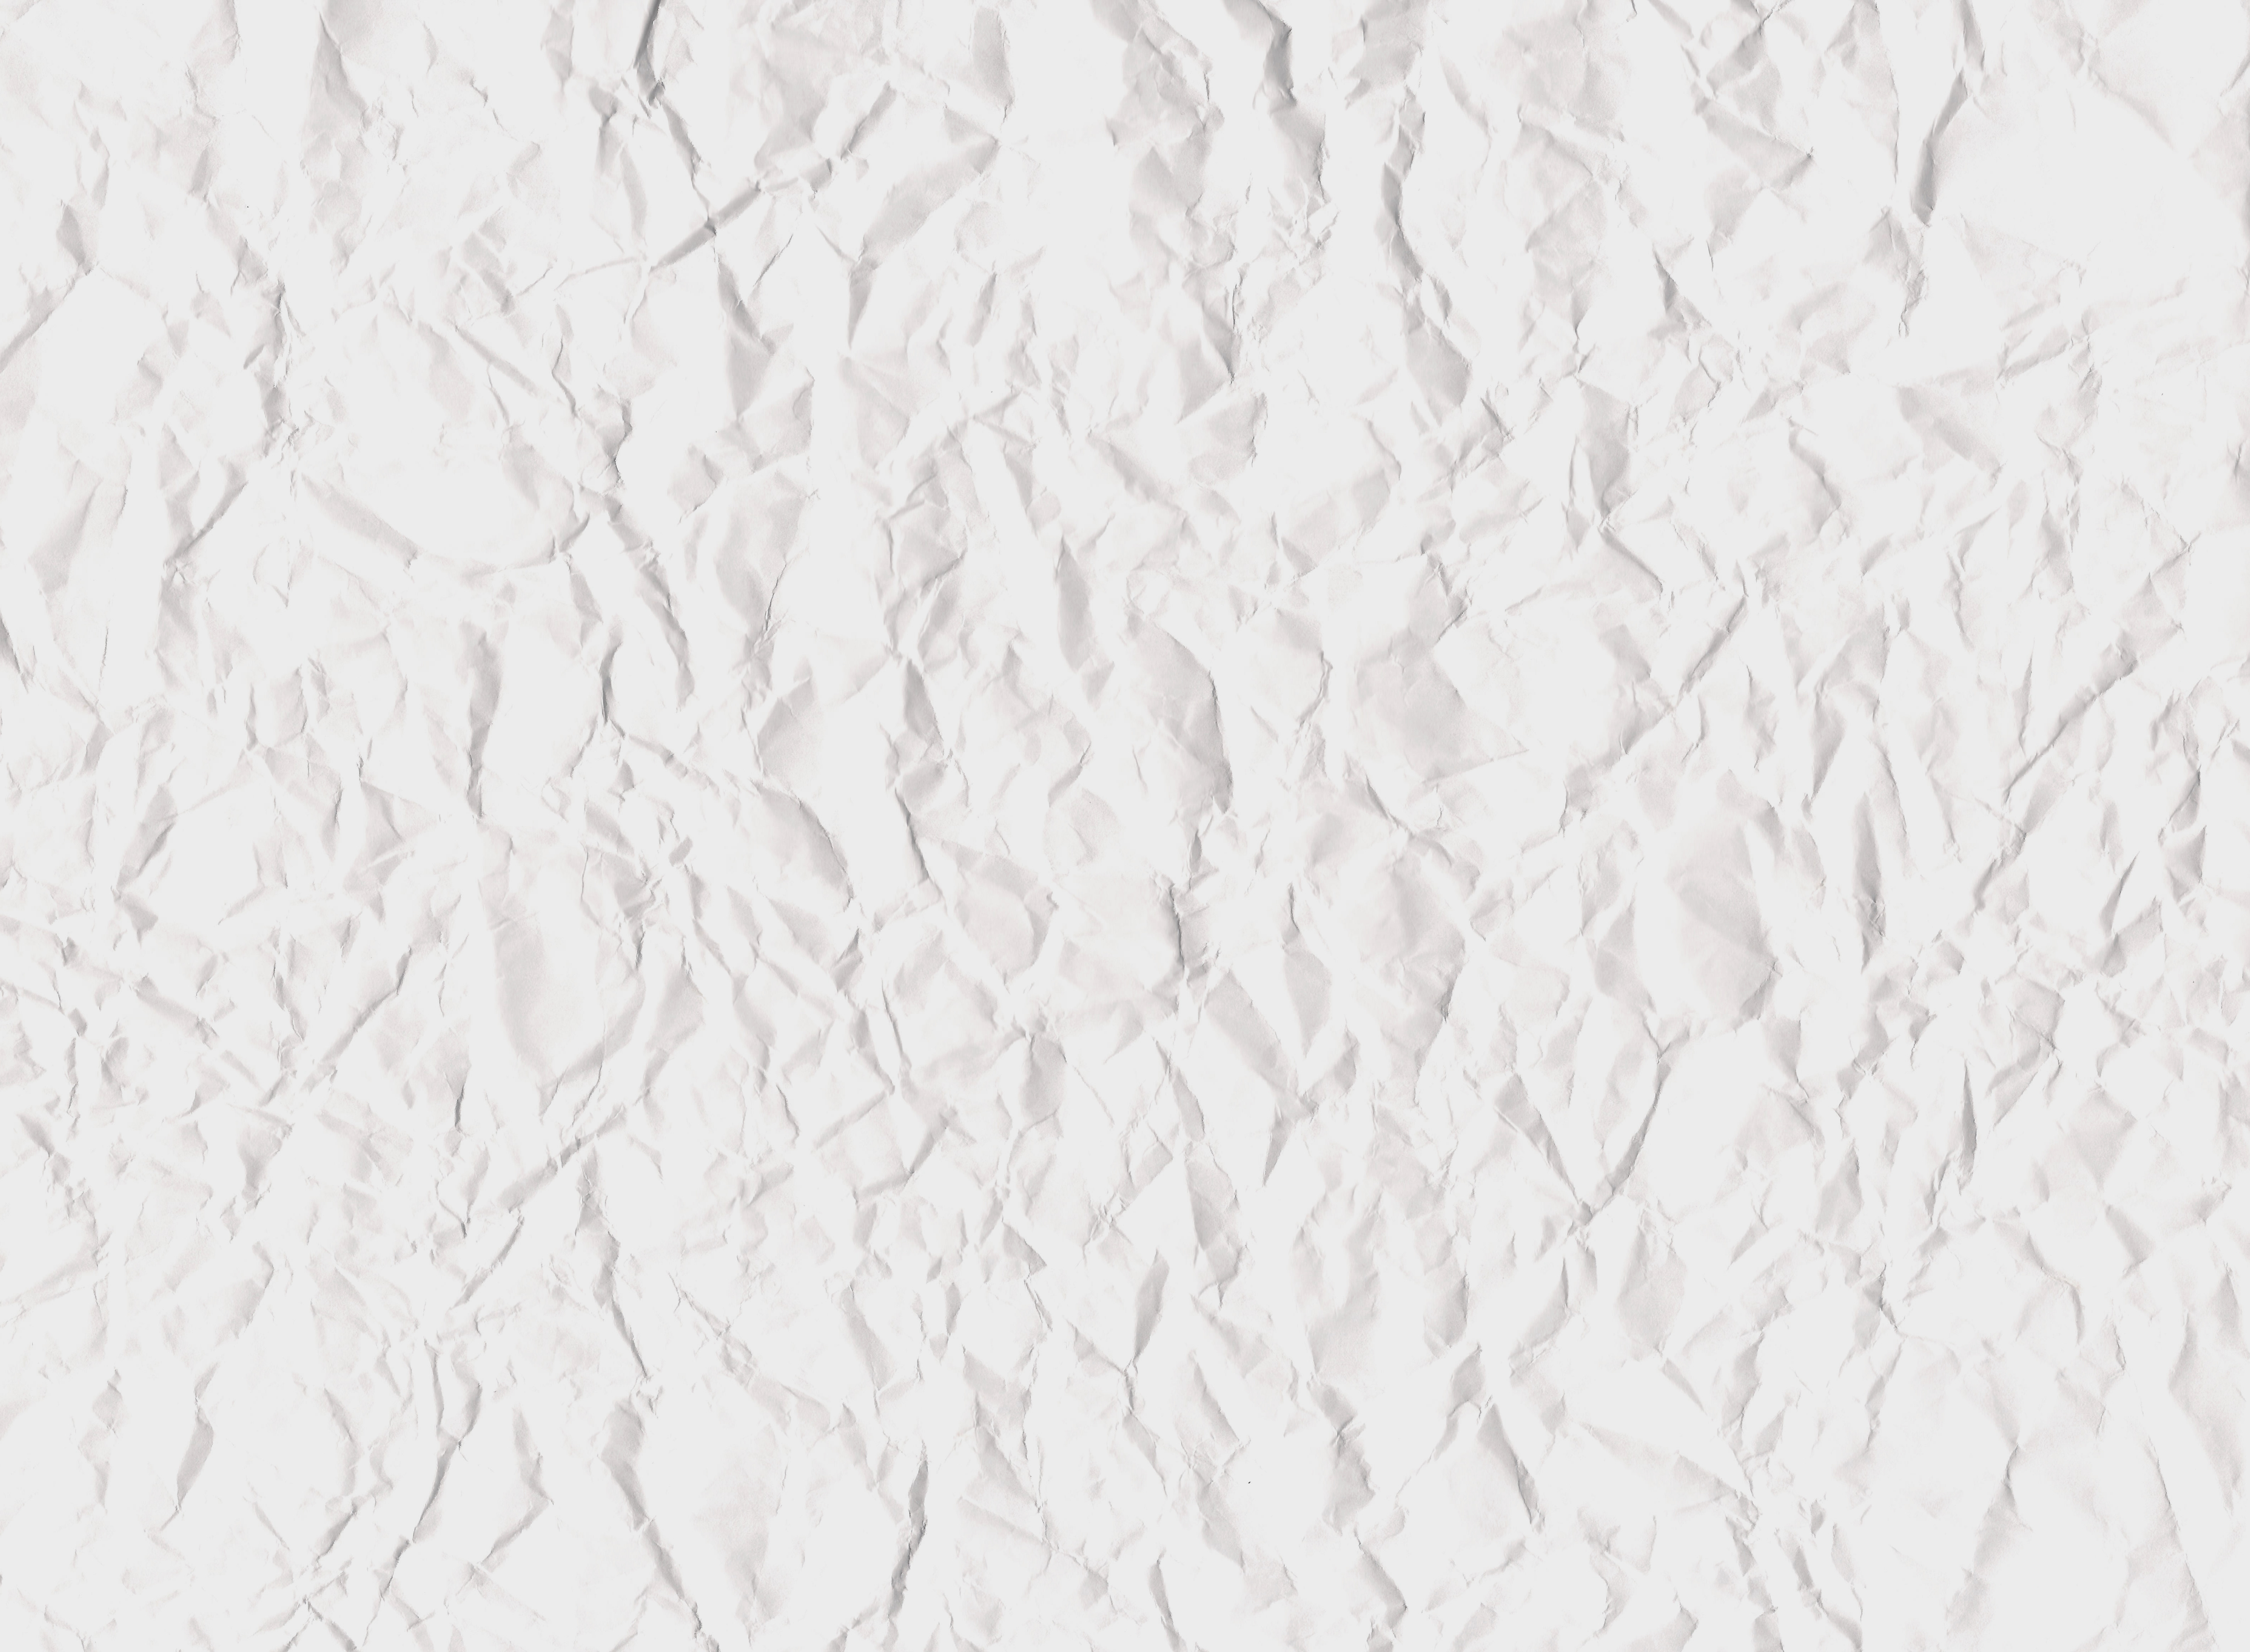 White Wrinkled Paper Texture Picture Free Photograph Photos Public